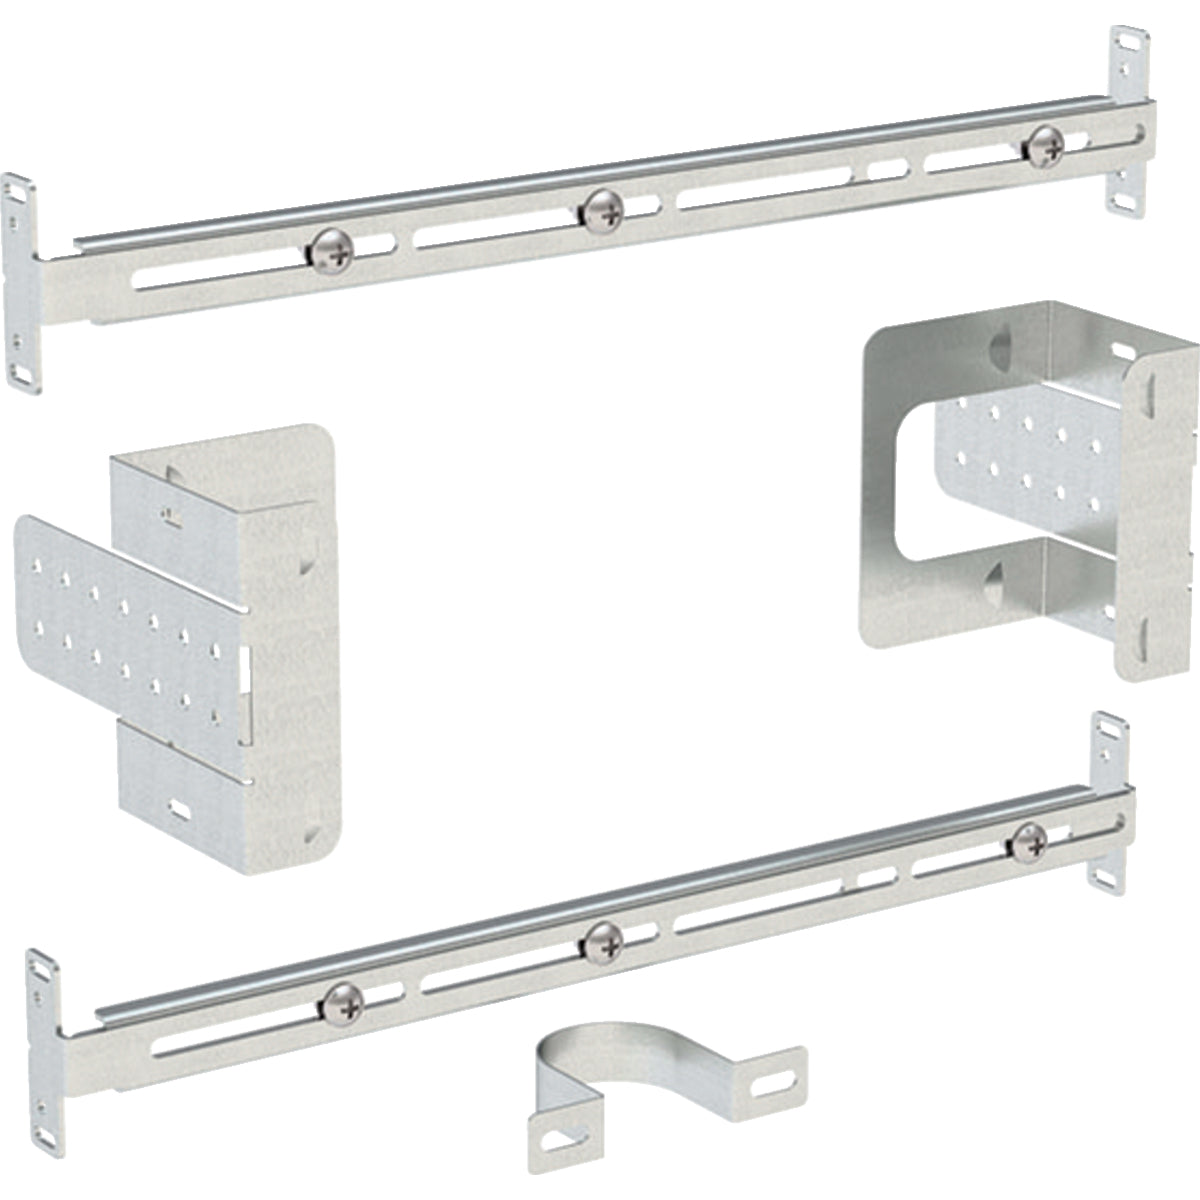 Geberit 243.272.00.1- Geberit mounting set for drywall constructions, for Sigma concealed cistern 8 cm - FaucetExpress.ca